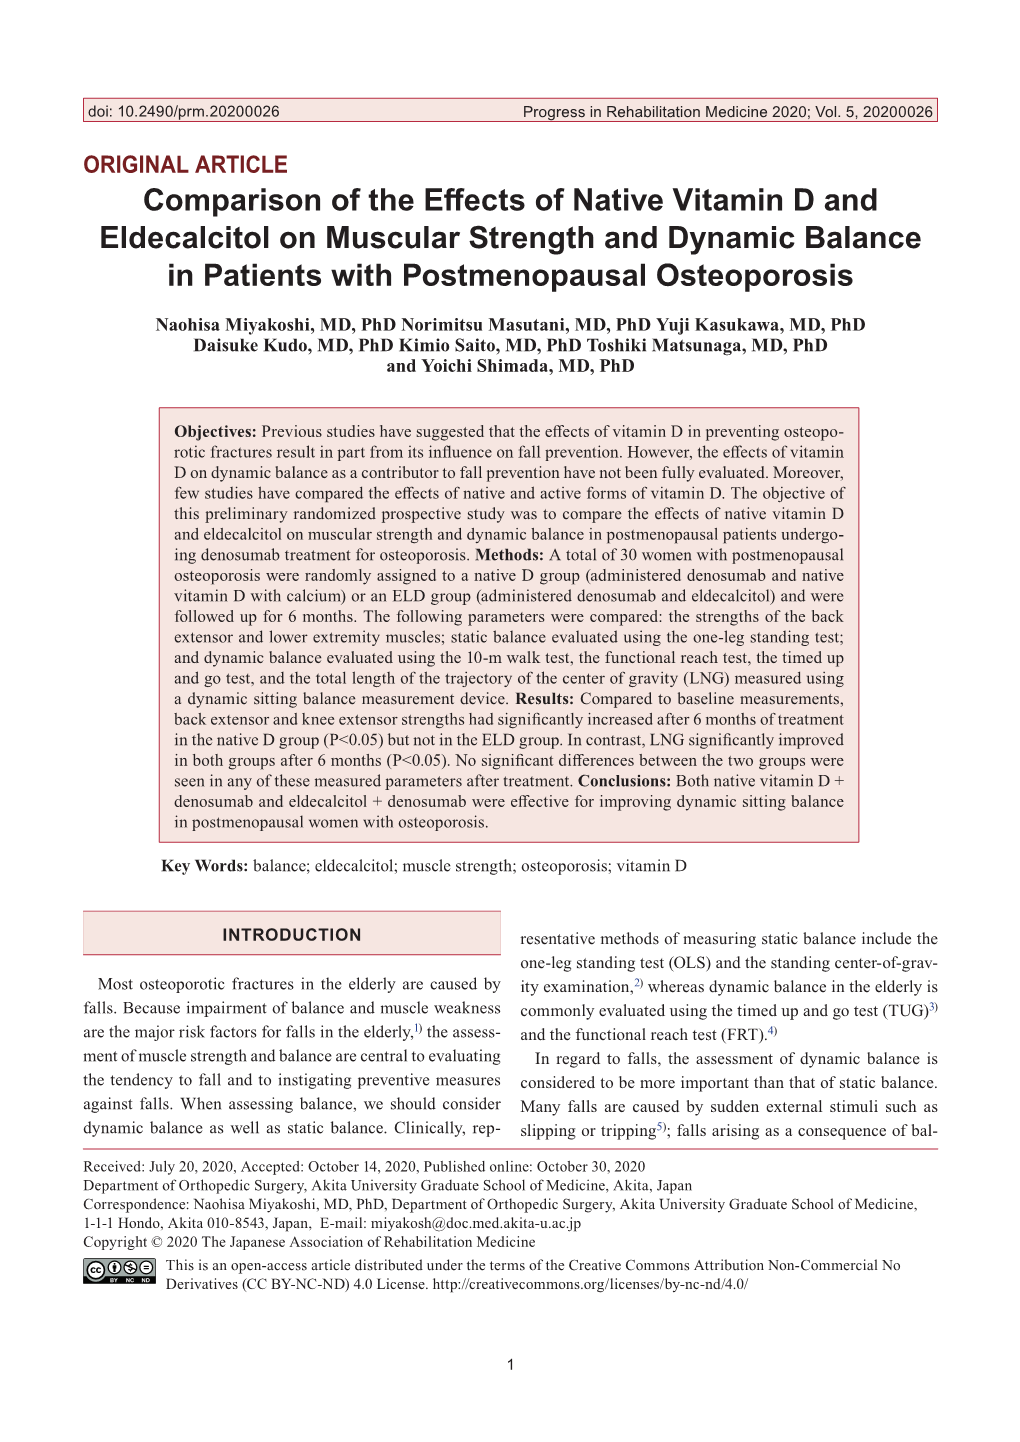 Comparison of the Effects of Native Vitamin D and Eldecalcitol on Muscular Strength and Dynamic Balance in Patients with Postmenopausal Osteoporosis